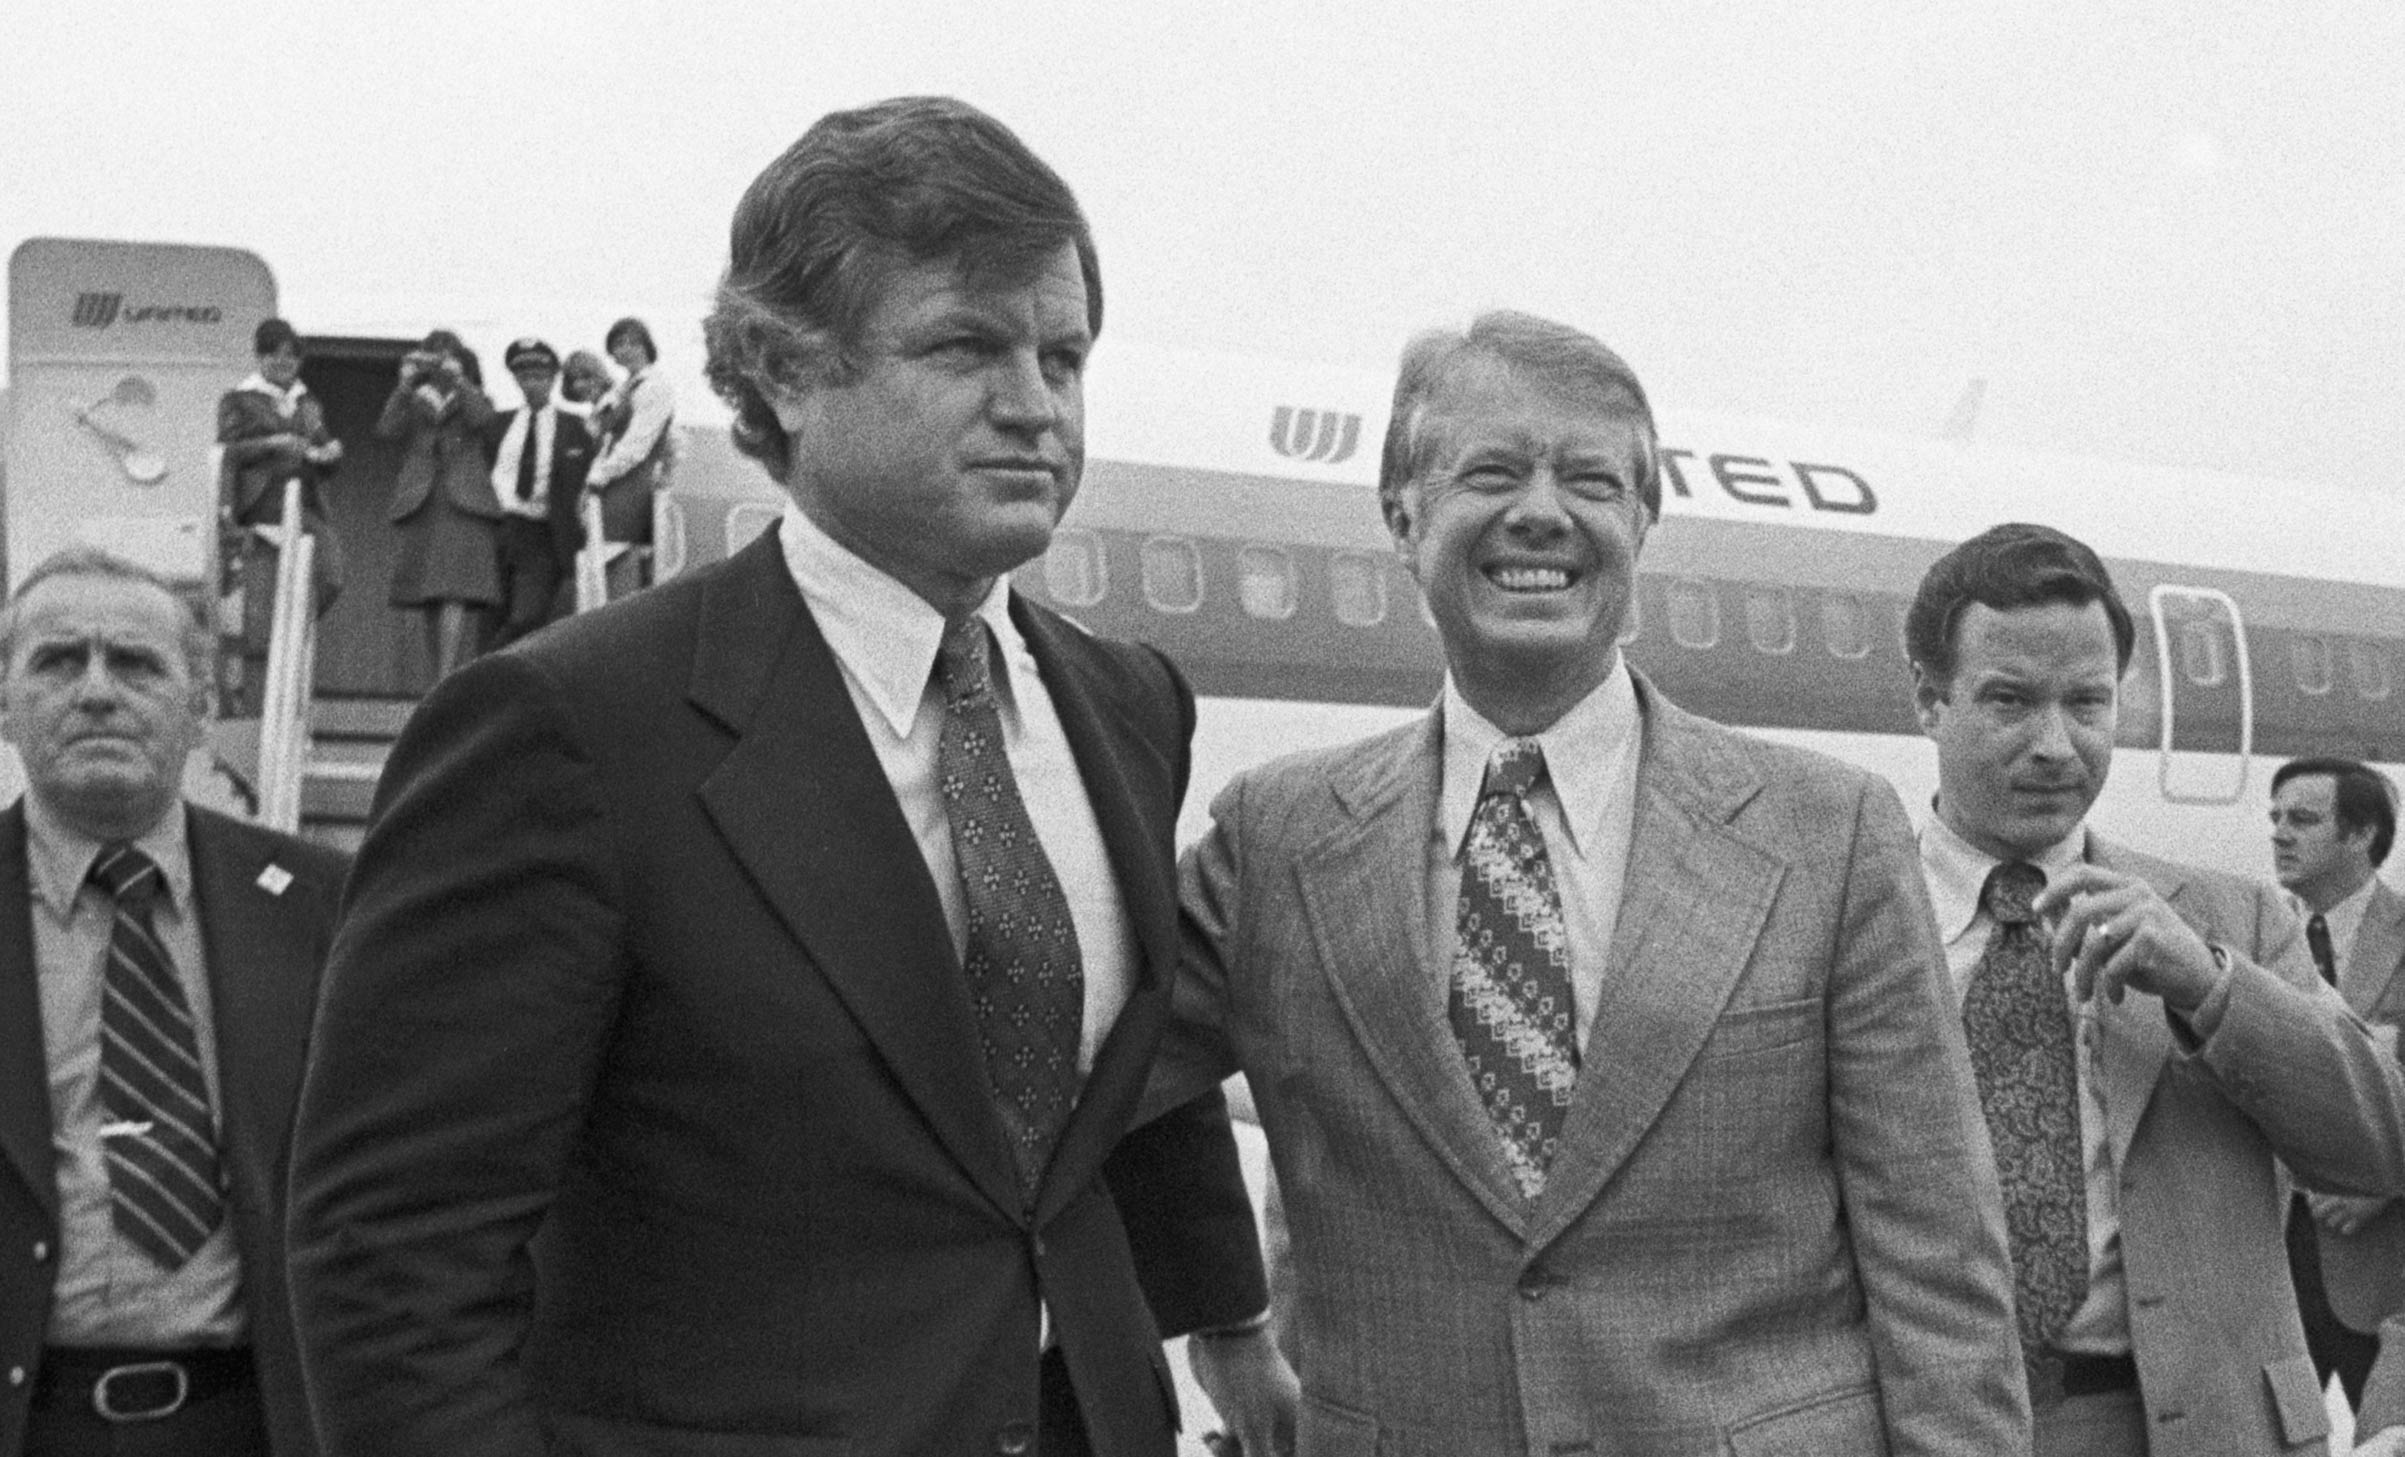 Pictured (center), Democratic presidential nominee Jimmy Carter, (R), puts his arm around Senator Edward M. Kennedy (L) as he arrived at Logan International Airport in Boston on Sep. 30, 1976, for a four-hour campaign blitz. (Bettmann/Getty)